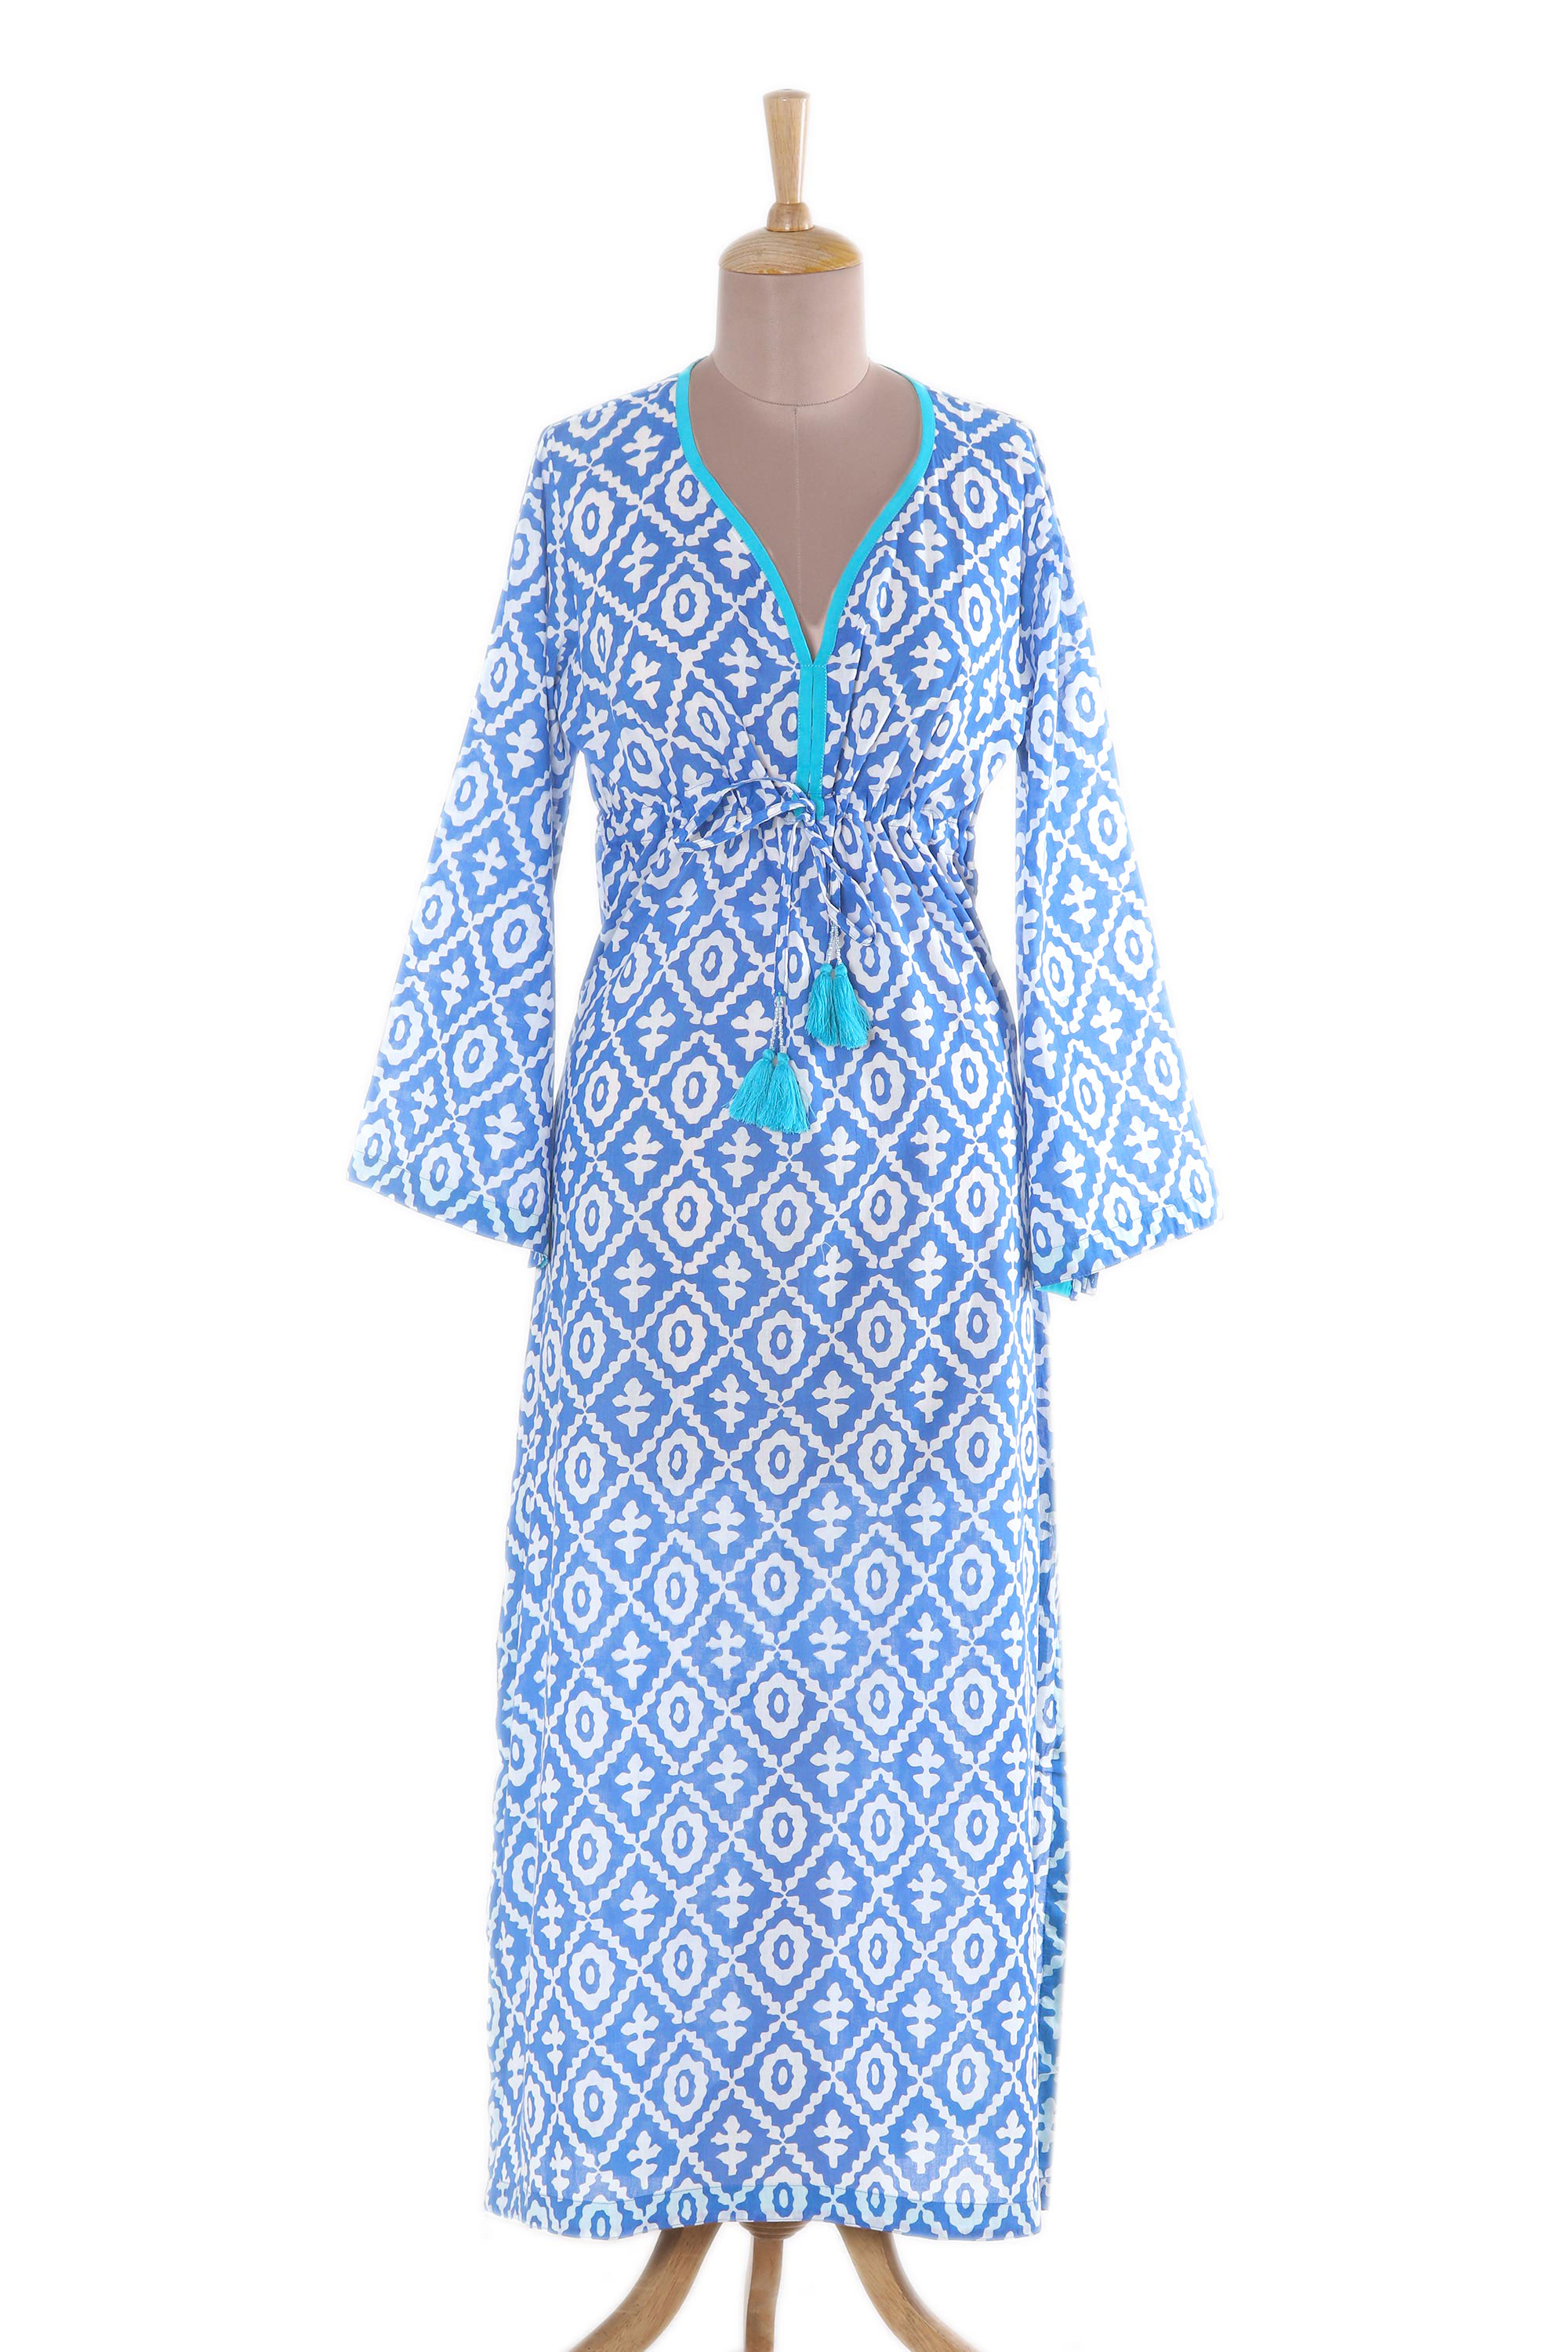 Blue and White Print 100% Cotton Long Sleeve Maxi Dress - Carefree ...